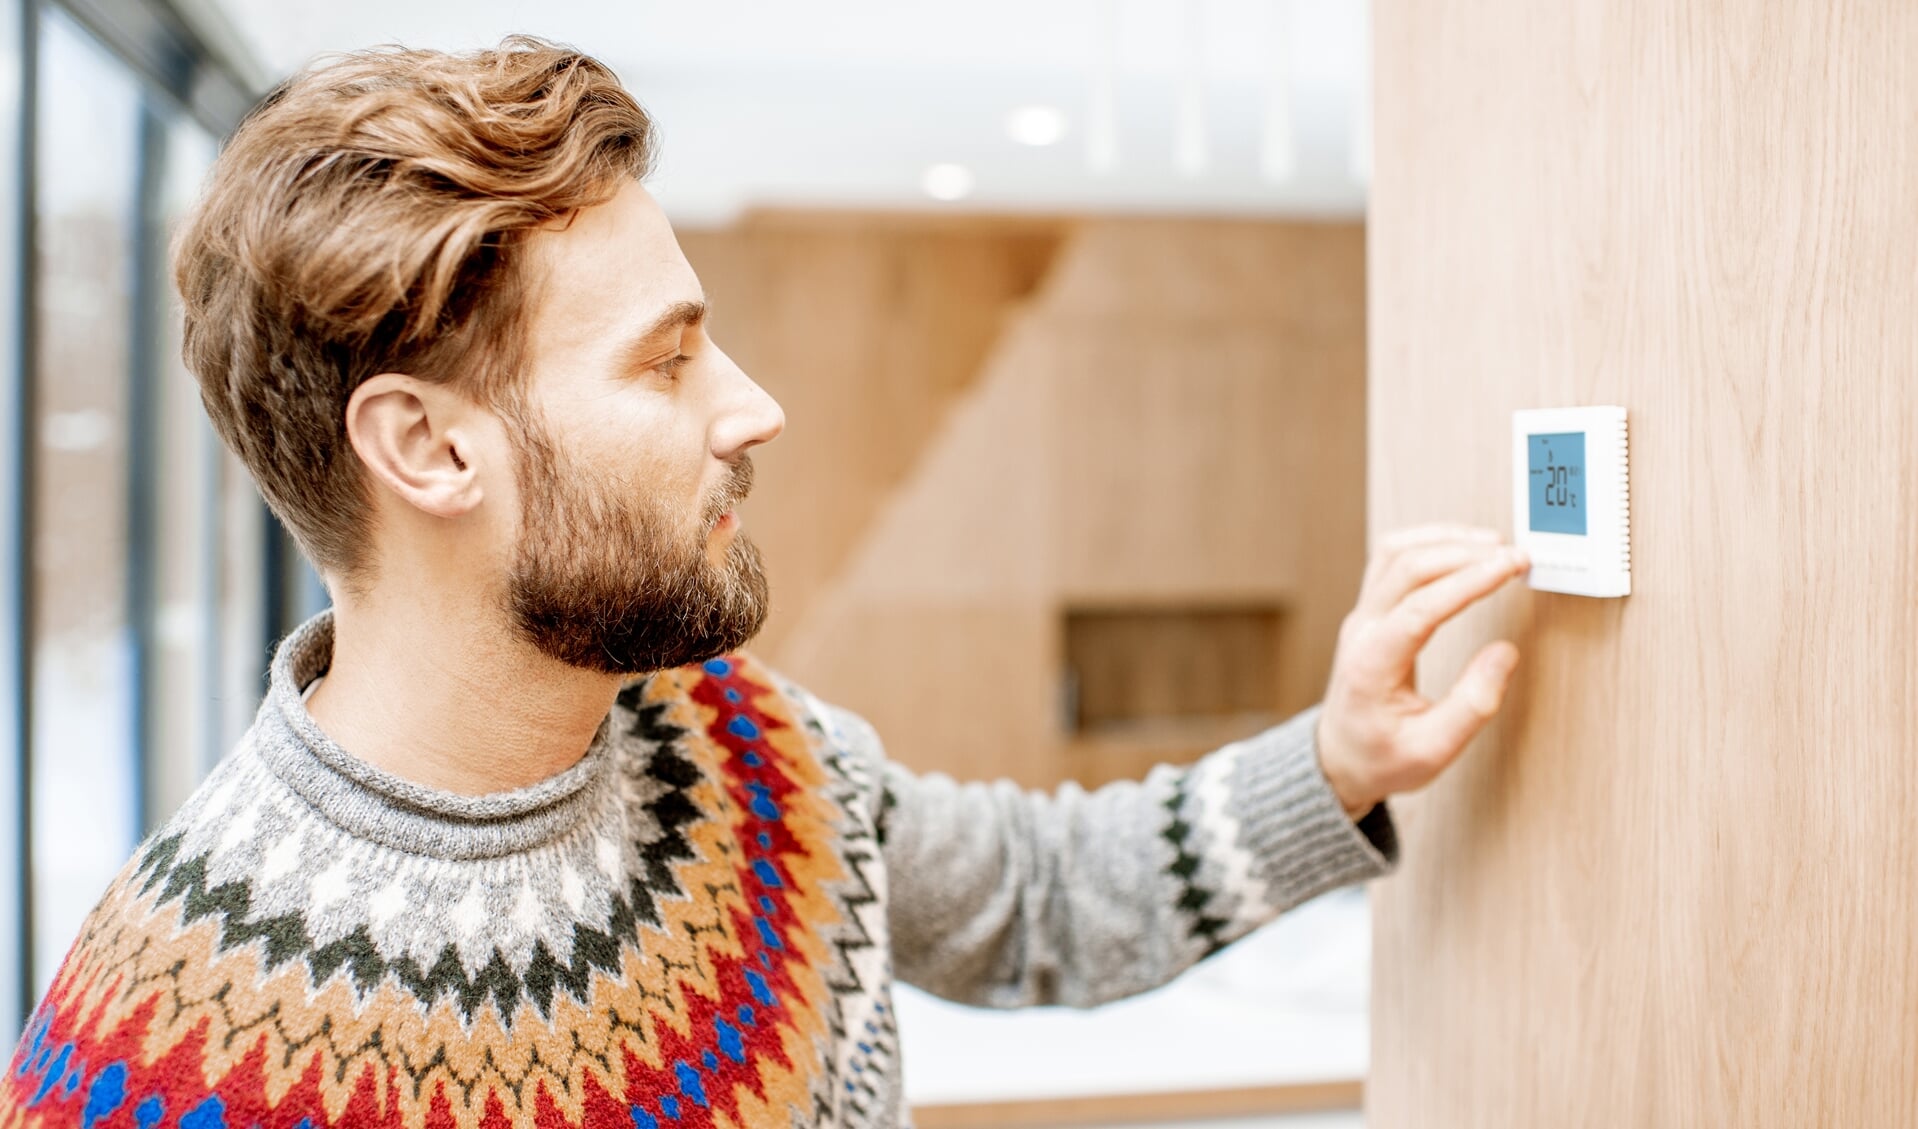 Man in sweater feeling cold adjusting room temperature with electronic thermostat at home